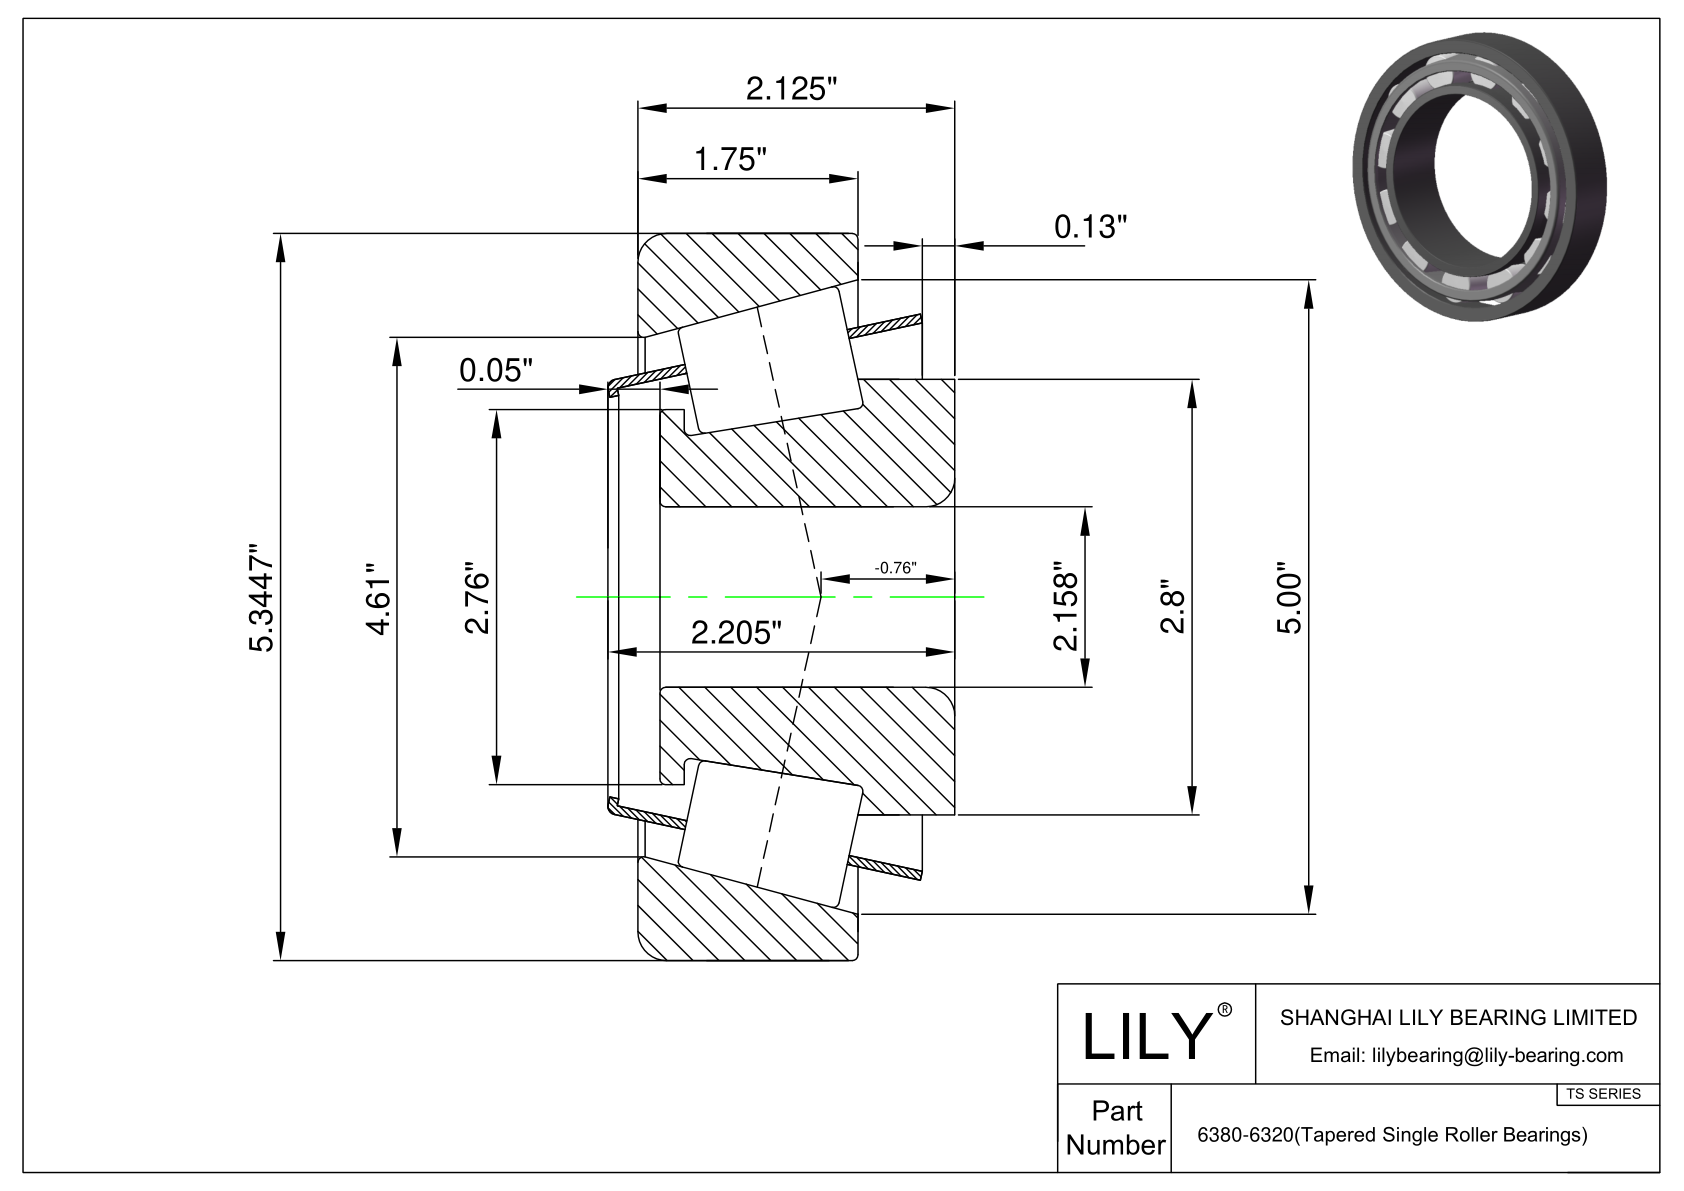 6380-6320 TS (Tapered Single Roller Bearings) (Imperial) cad drawing